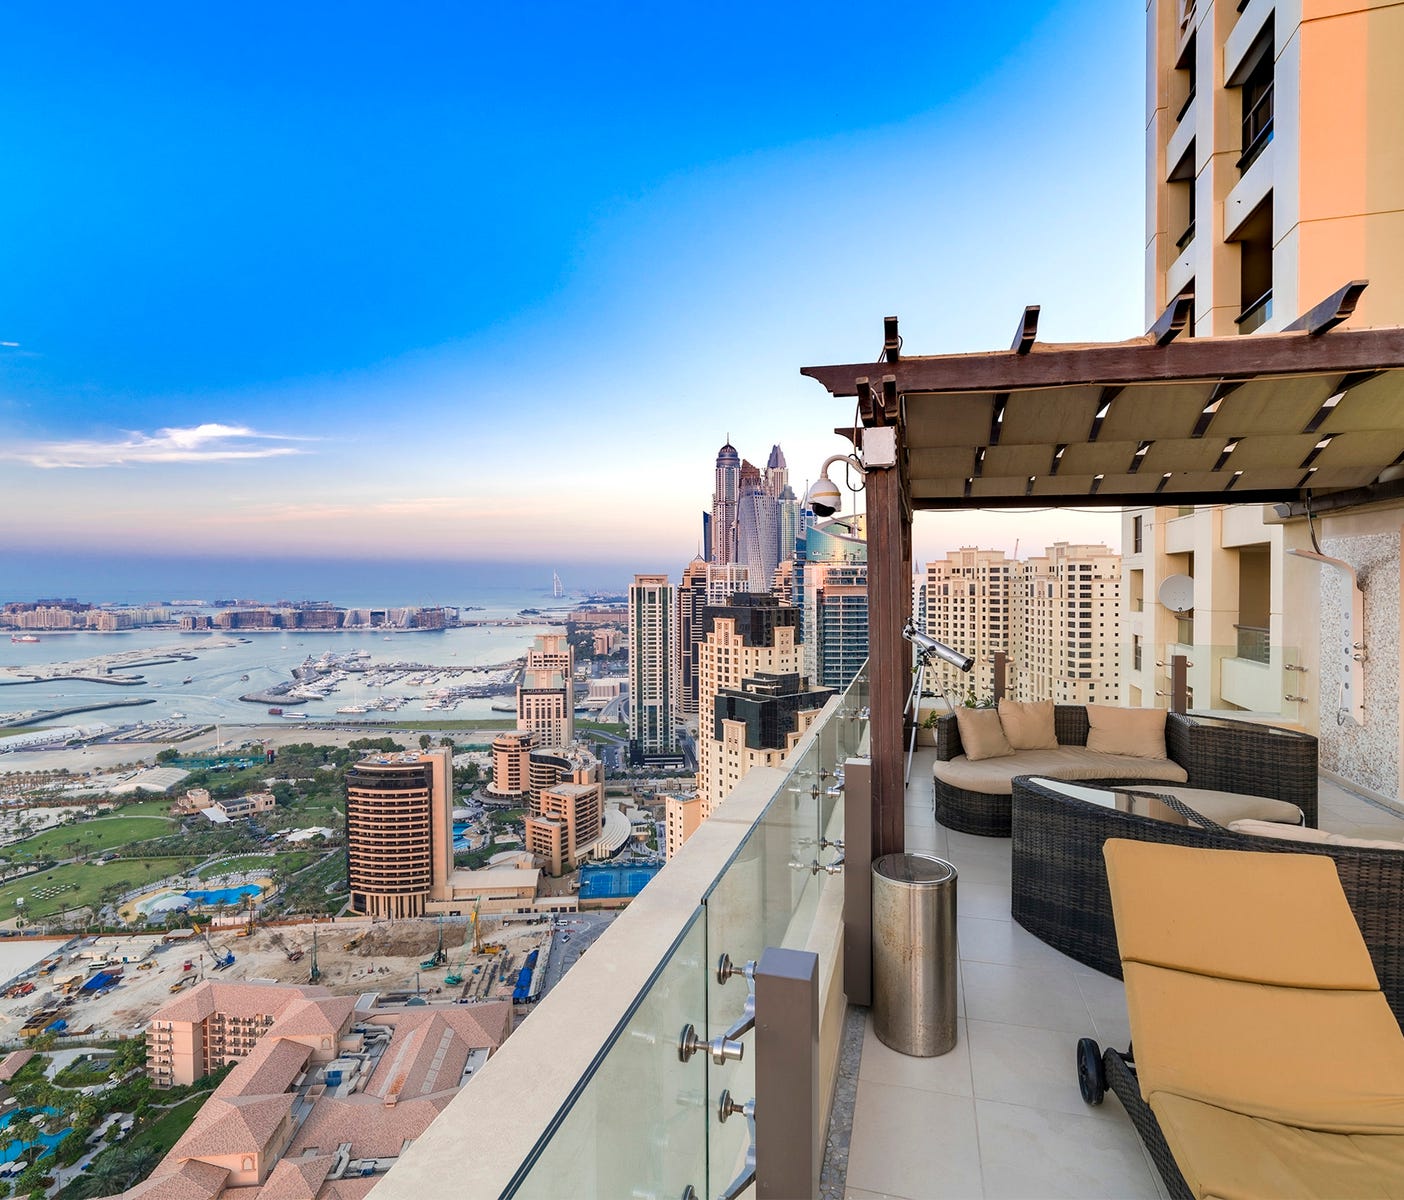 This three-bedroom rental in Dubai, United Arab Emirates, sleeps nine and rents from $342 a night.